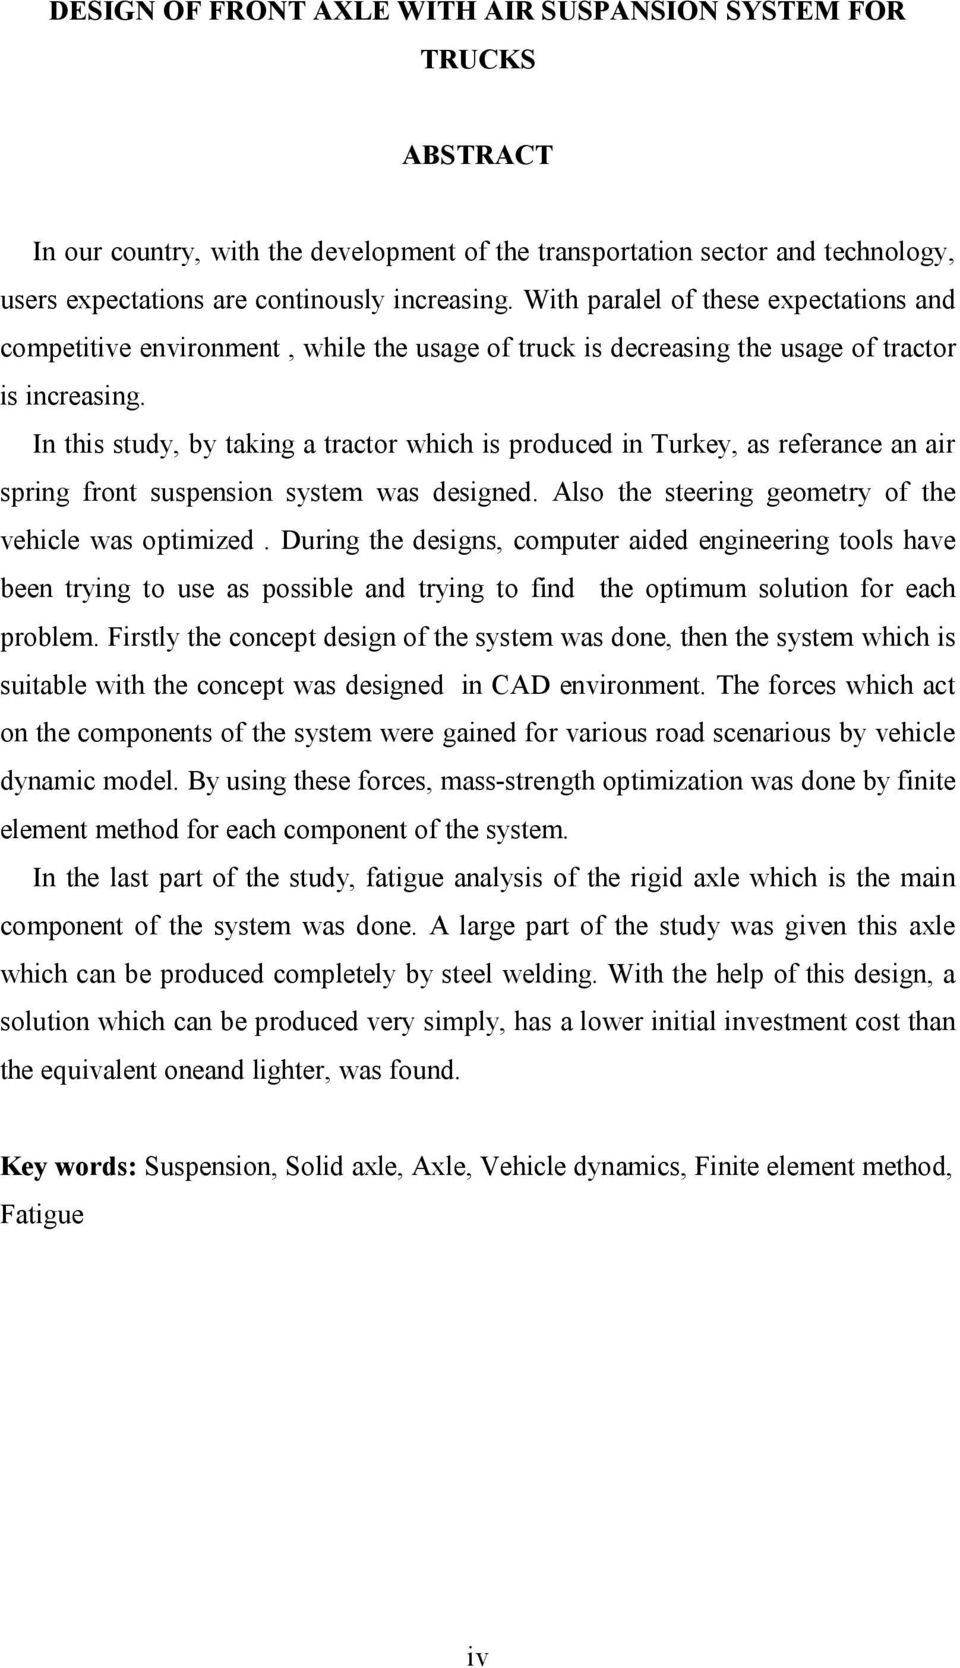 In this study, by taking a tractor which is produced in Turkey, as referance an air spring front suspension system was designed. Also the steering geometry of the vehicle was optimized.